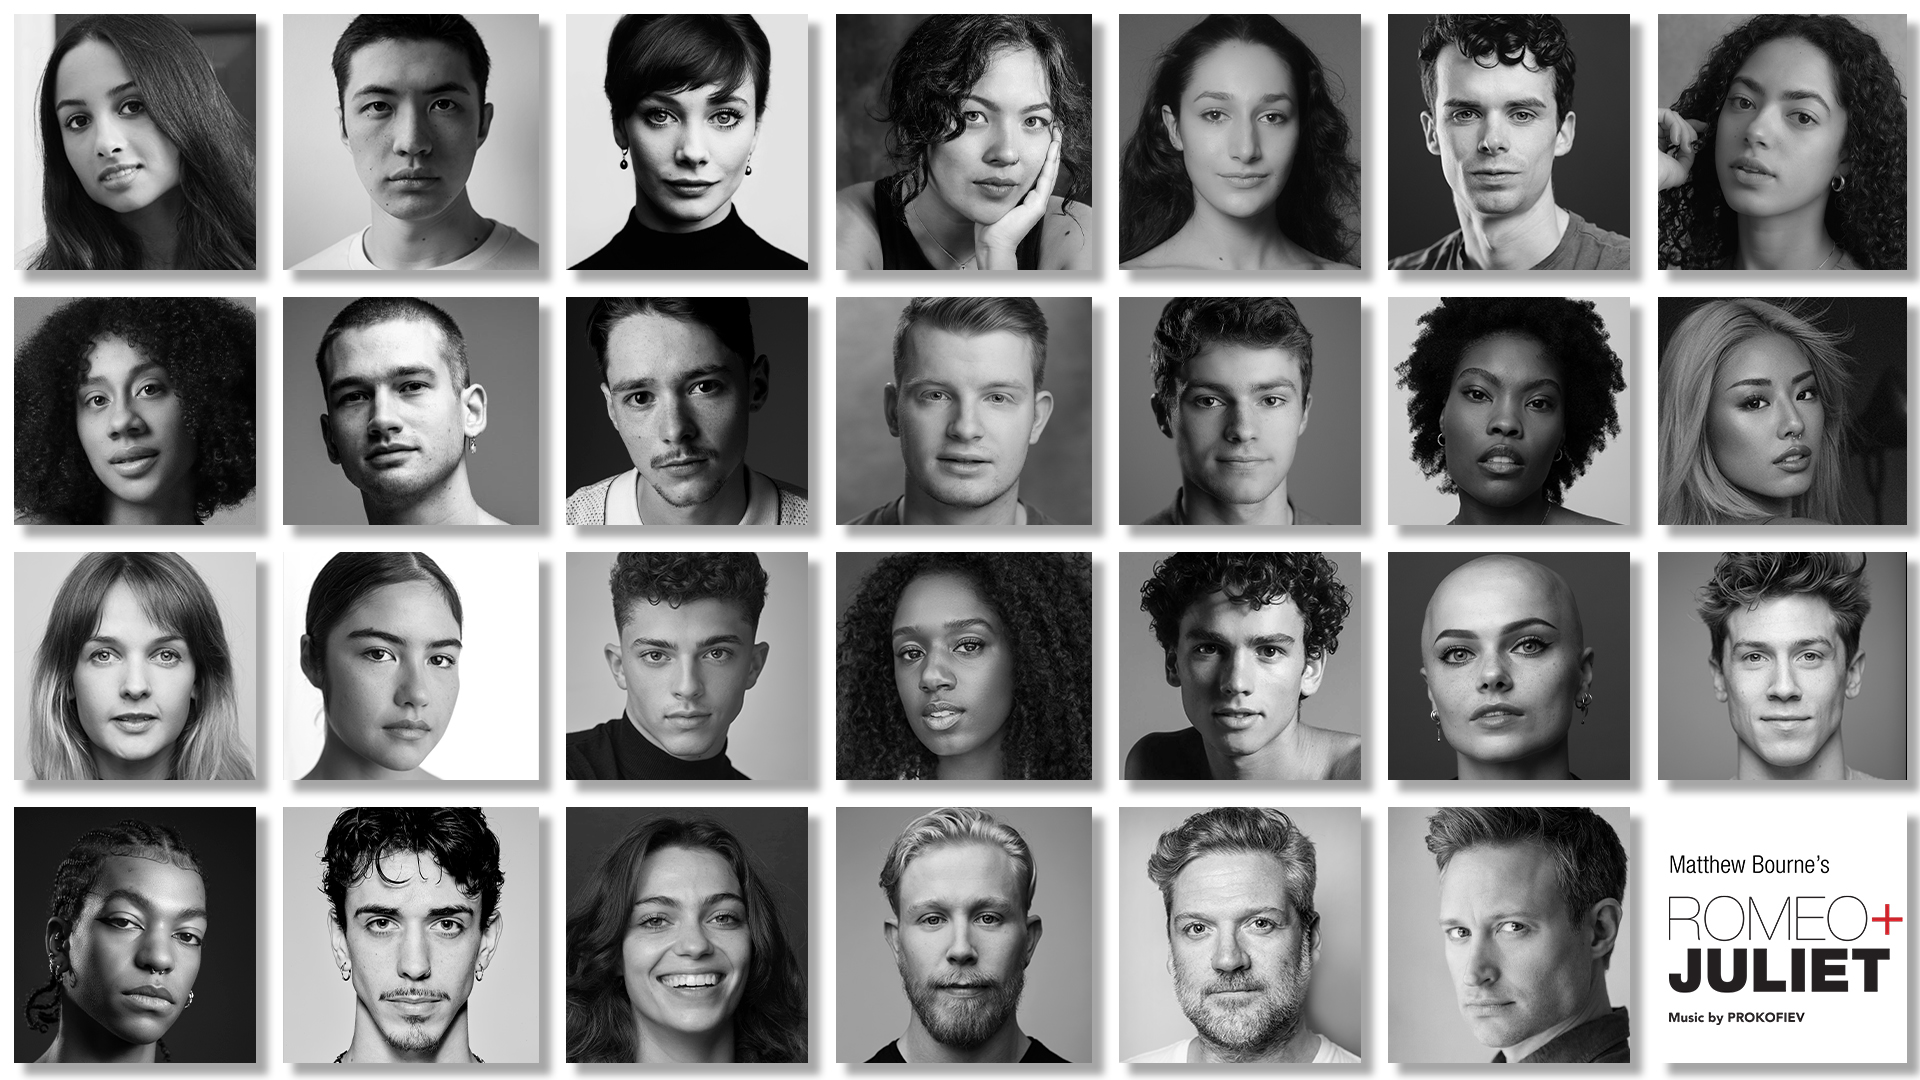 New Cast Announced for & Juliet